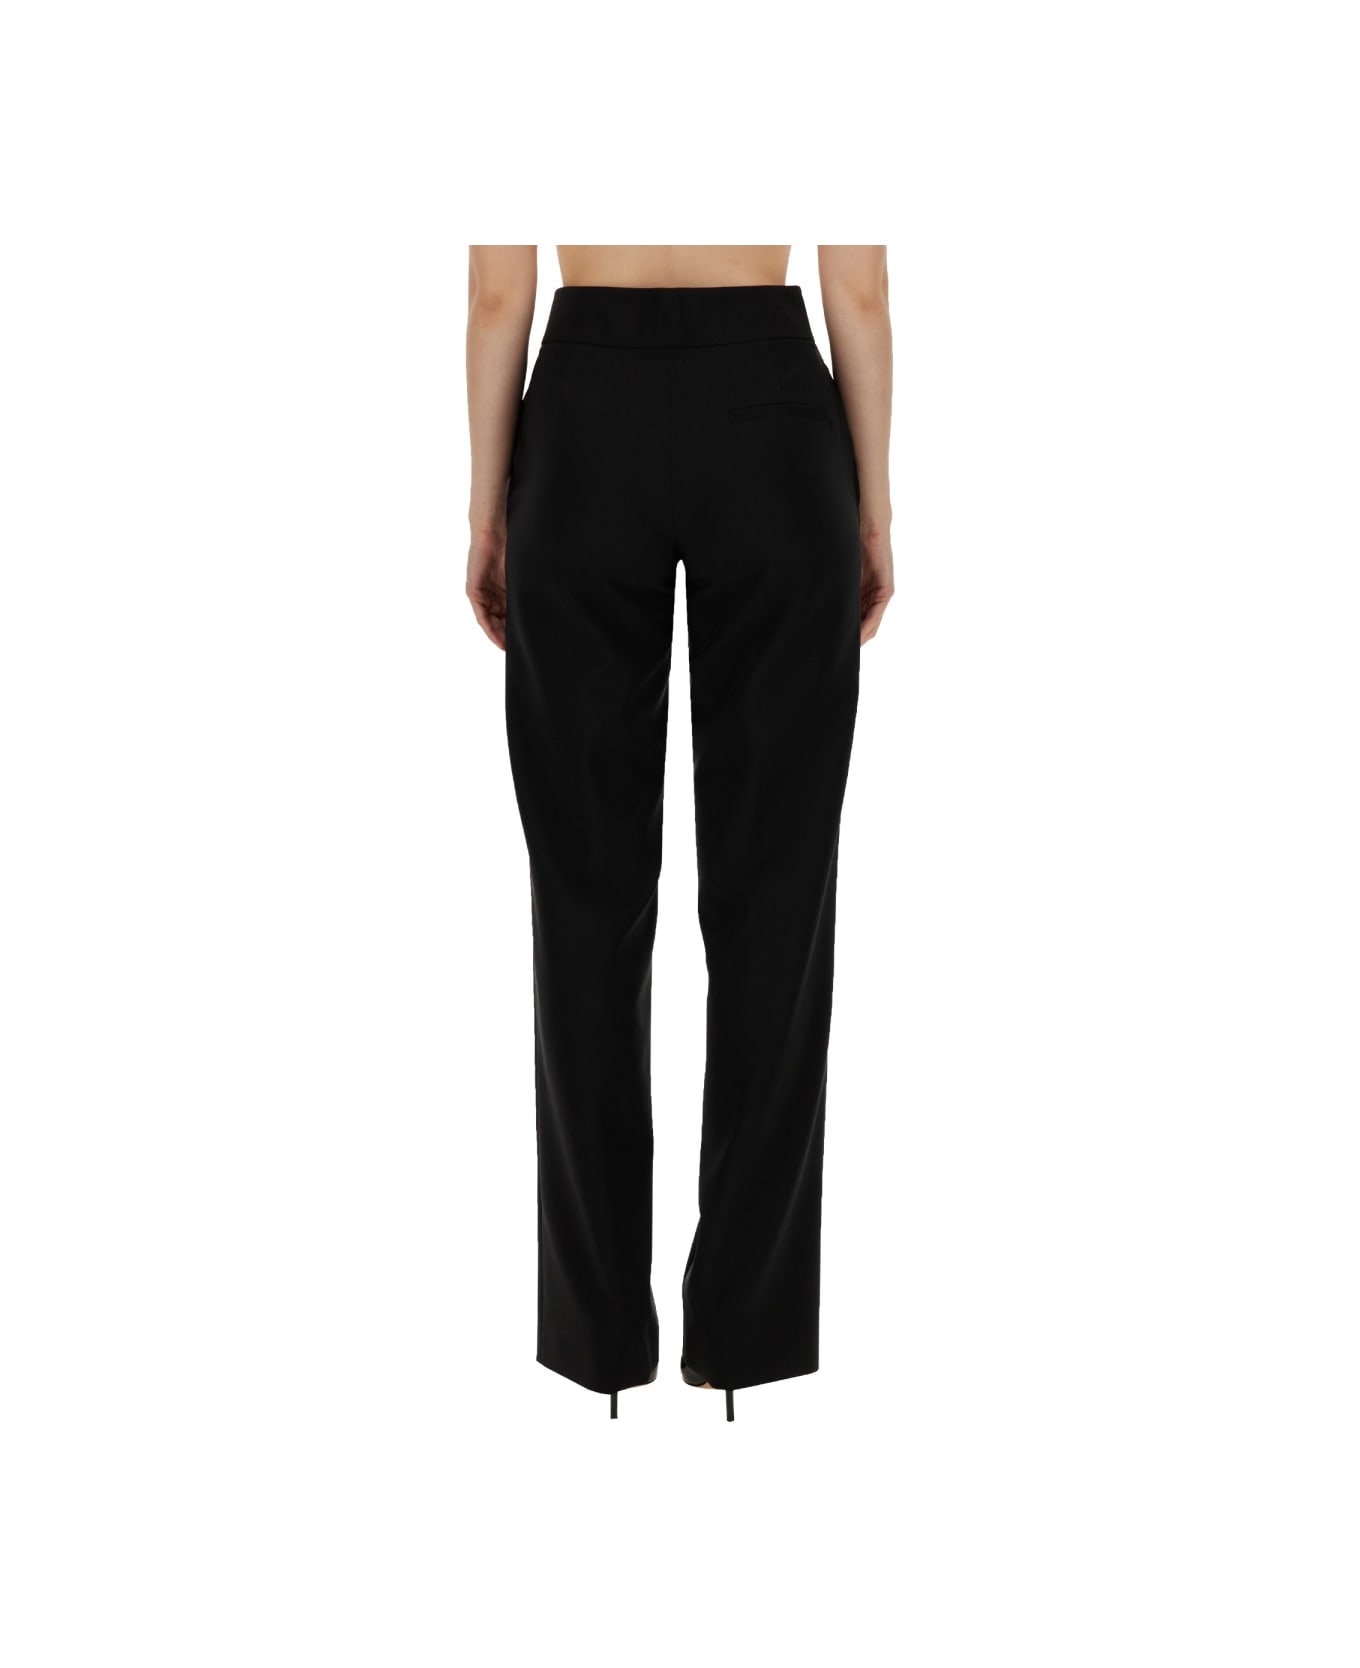 Genny Tailored Pants - BLACK